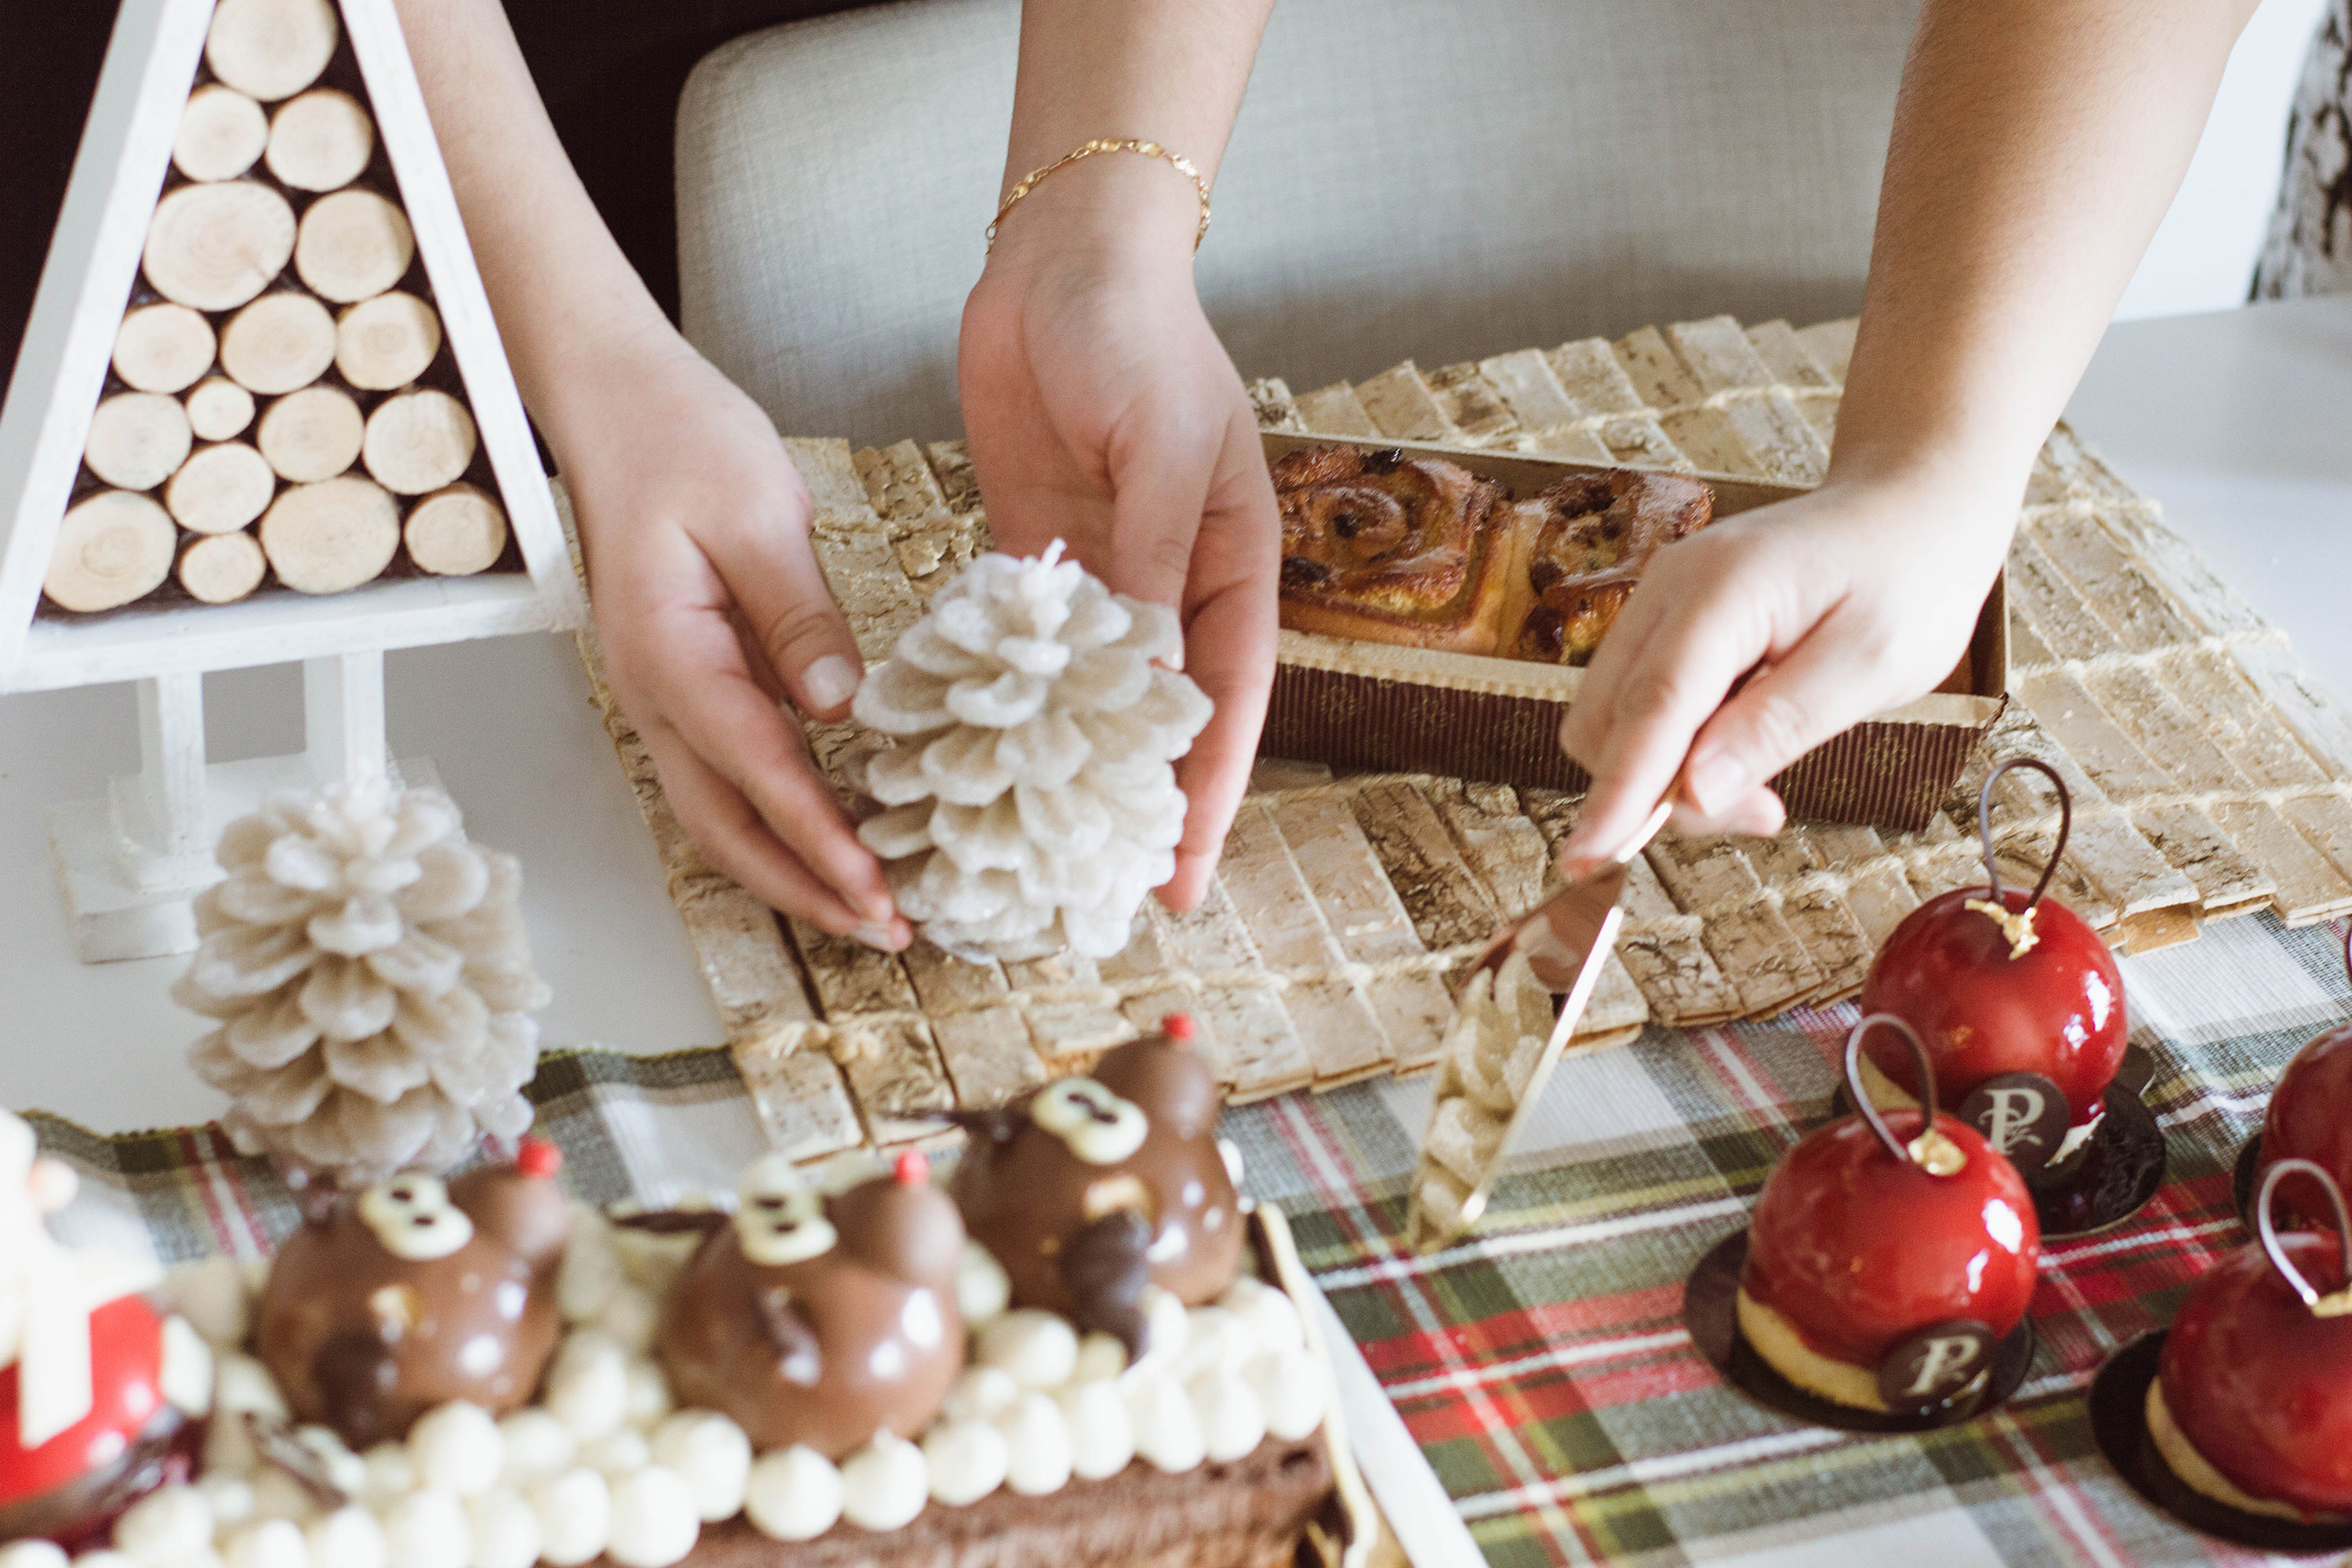 Play hostess without losing your cool: here are our surefire tips to throwing (and enjoying) your own holiday dinner party.